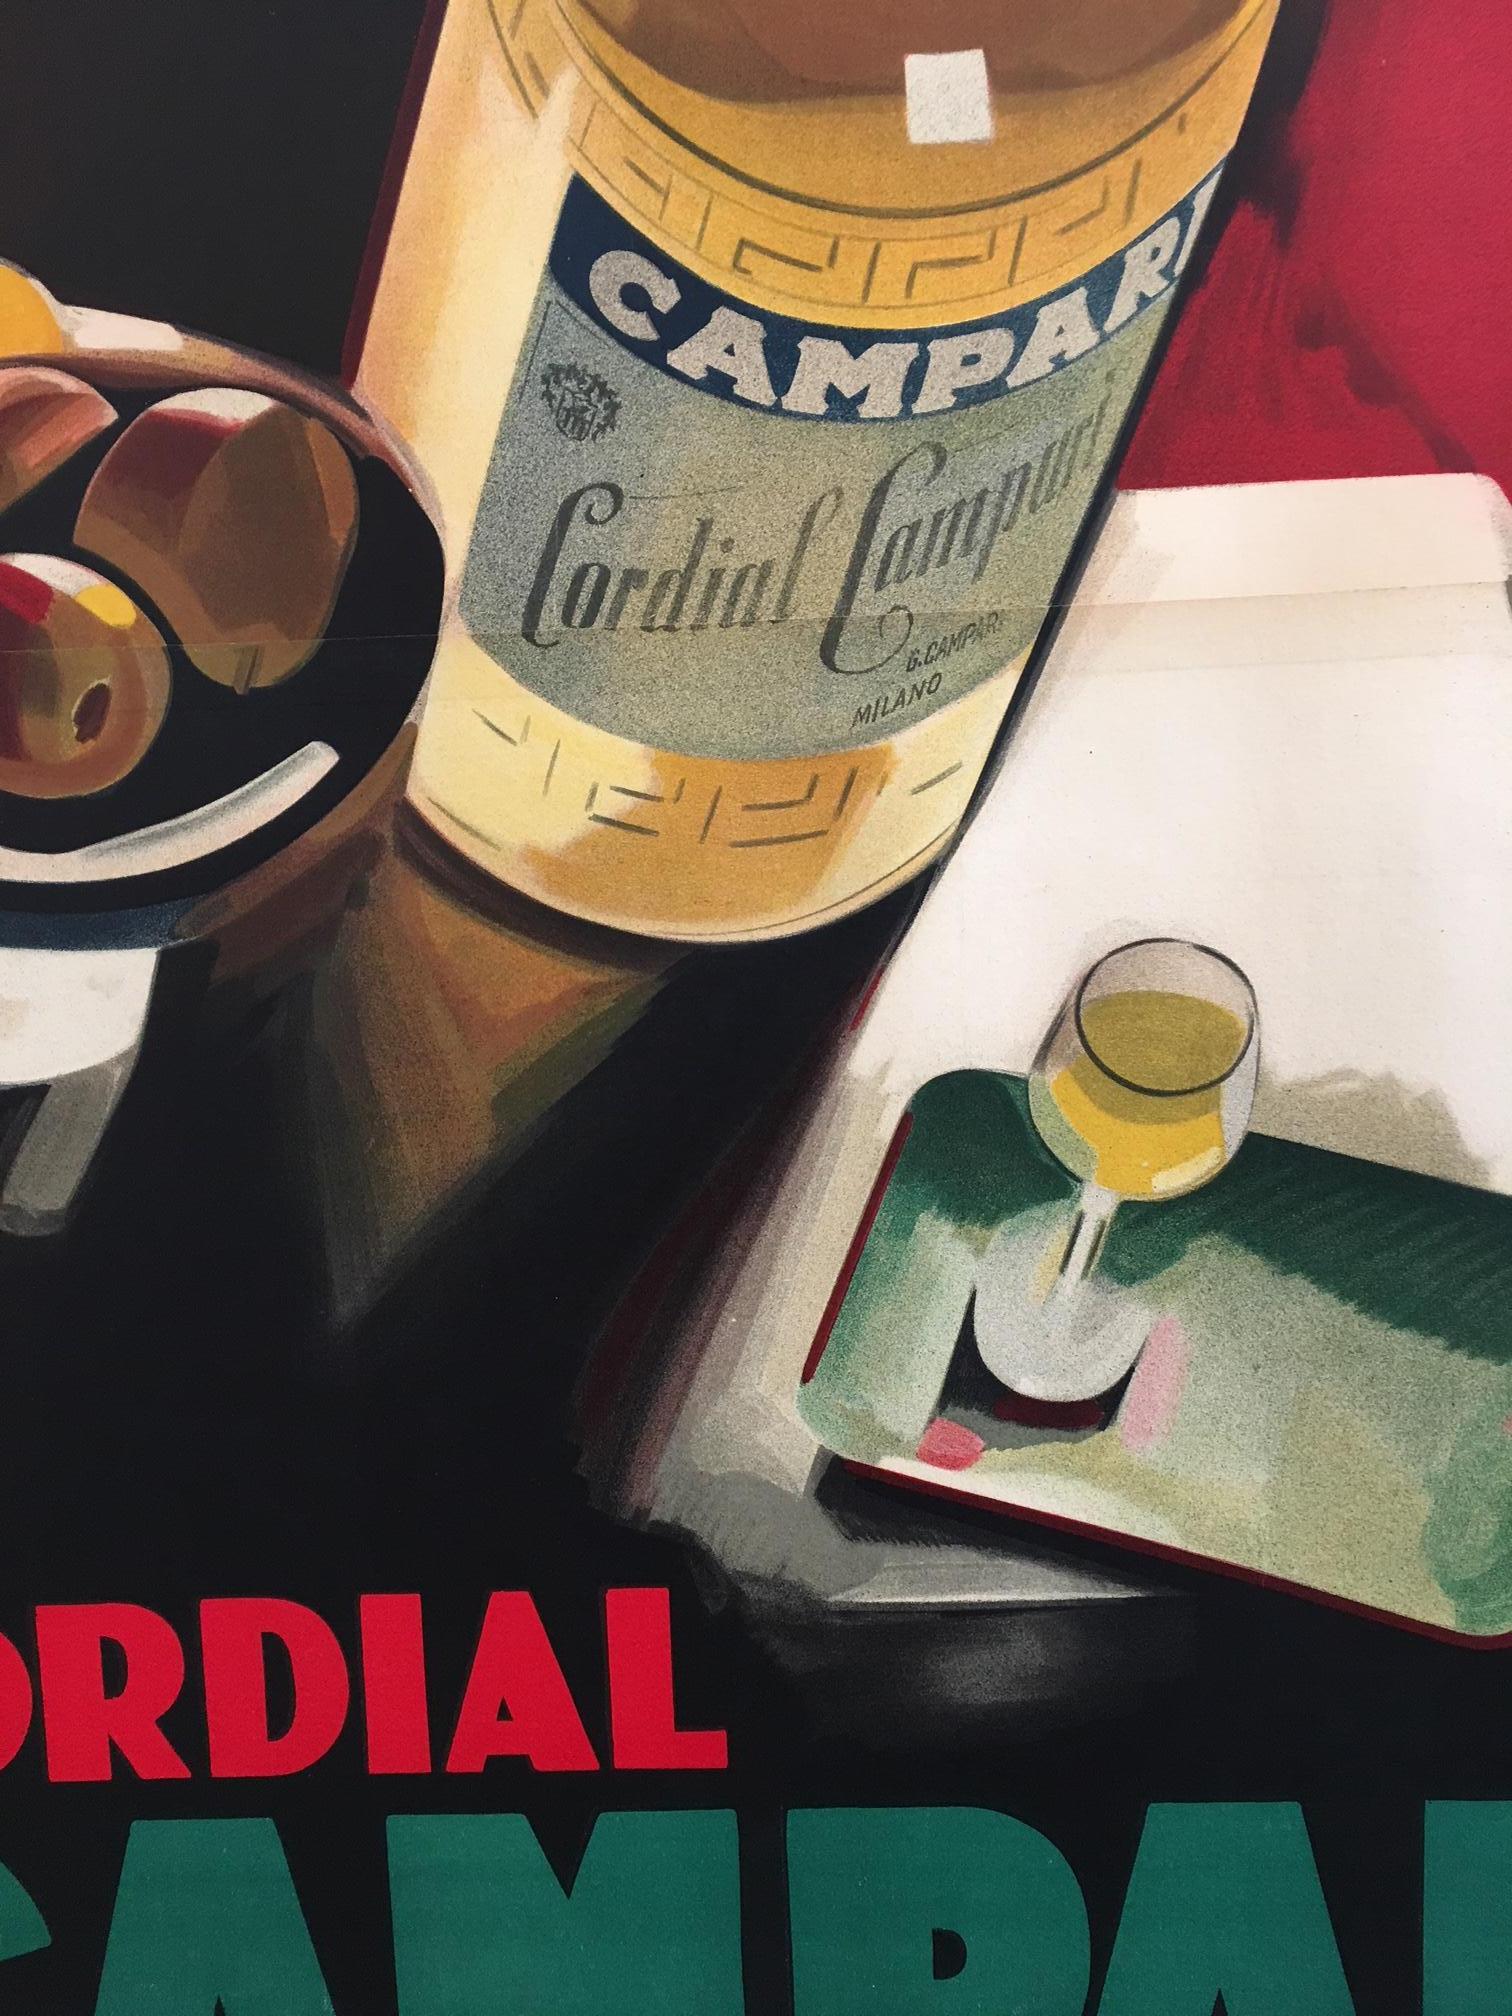 Original vintage poster, Cordial Campari Nizzoli, 1927 

Condition backing / material: Linen (backed on acid-free paper and cotton canvas)

Printer, publisher or brands: Devambez

Artist: Marcello Nizzoli

Dimensions: 138 x 195cm

Format: